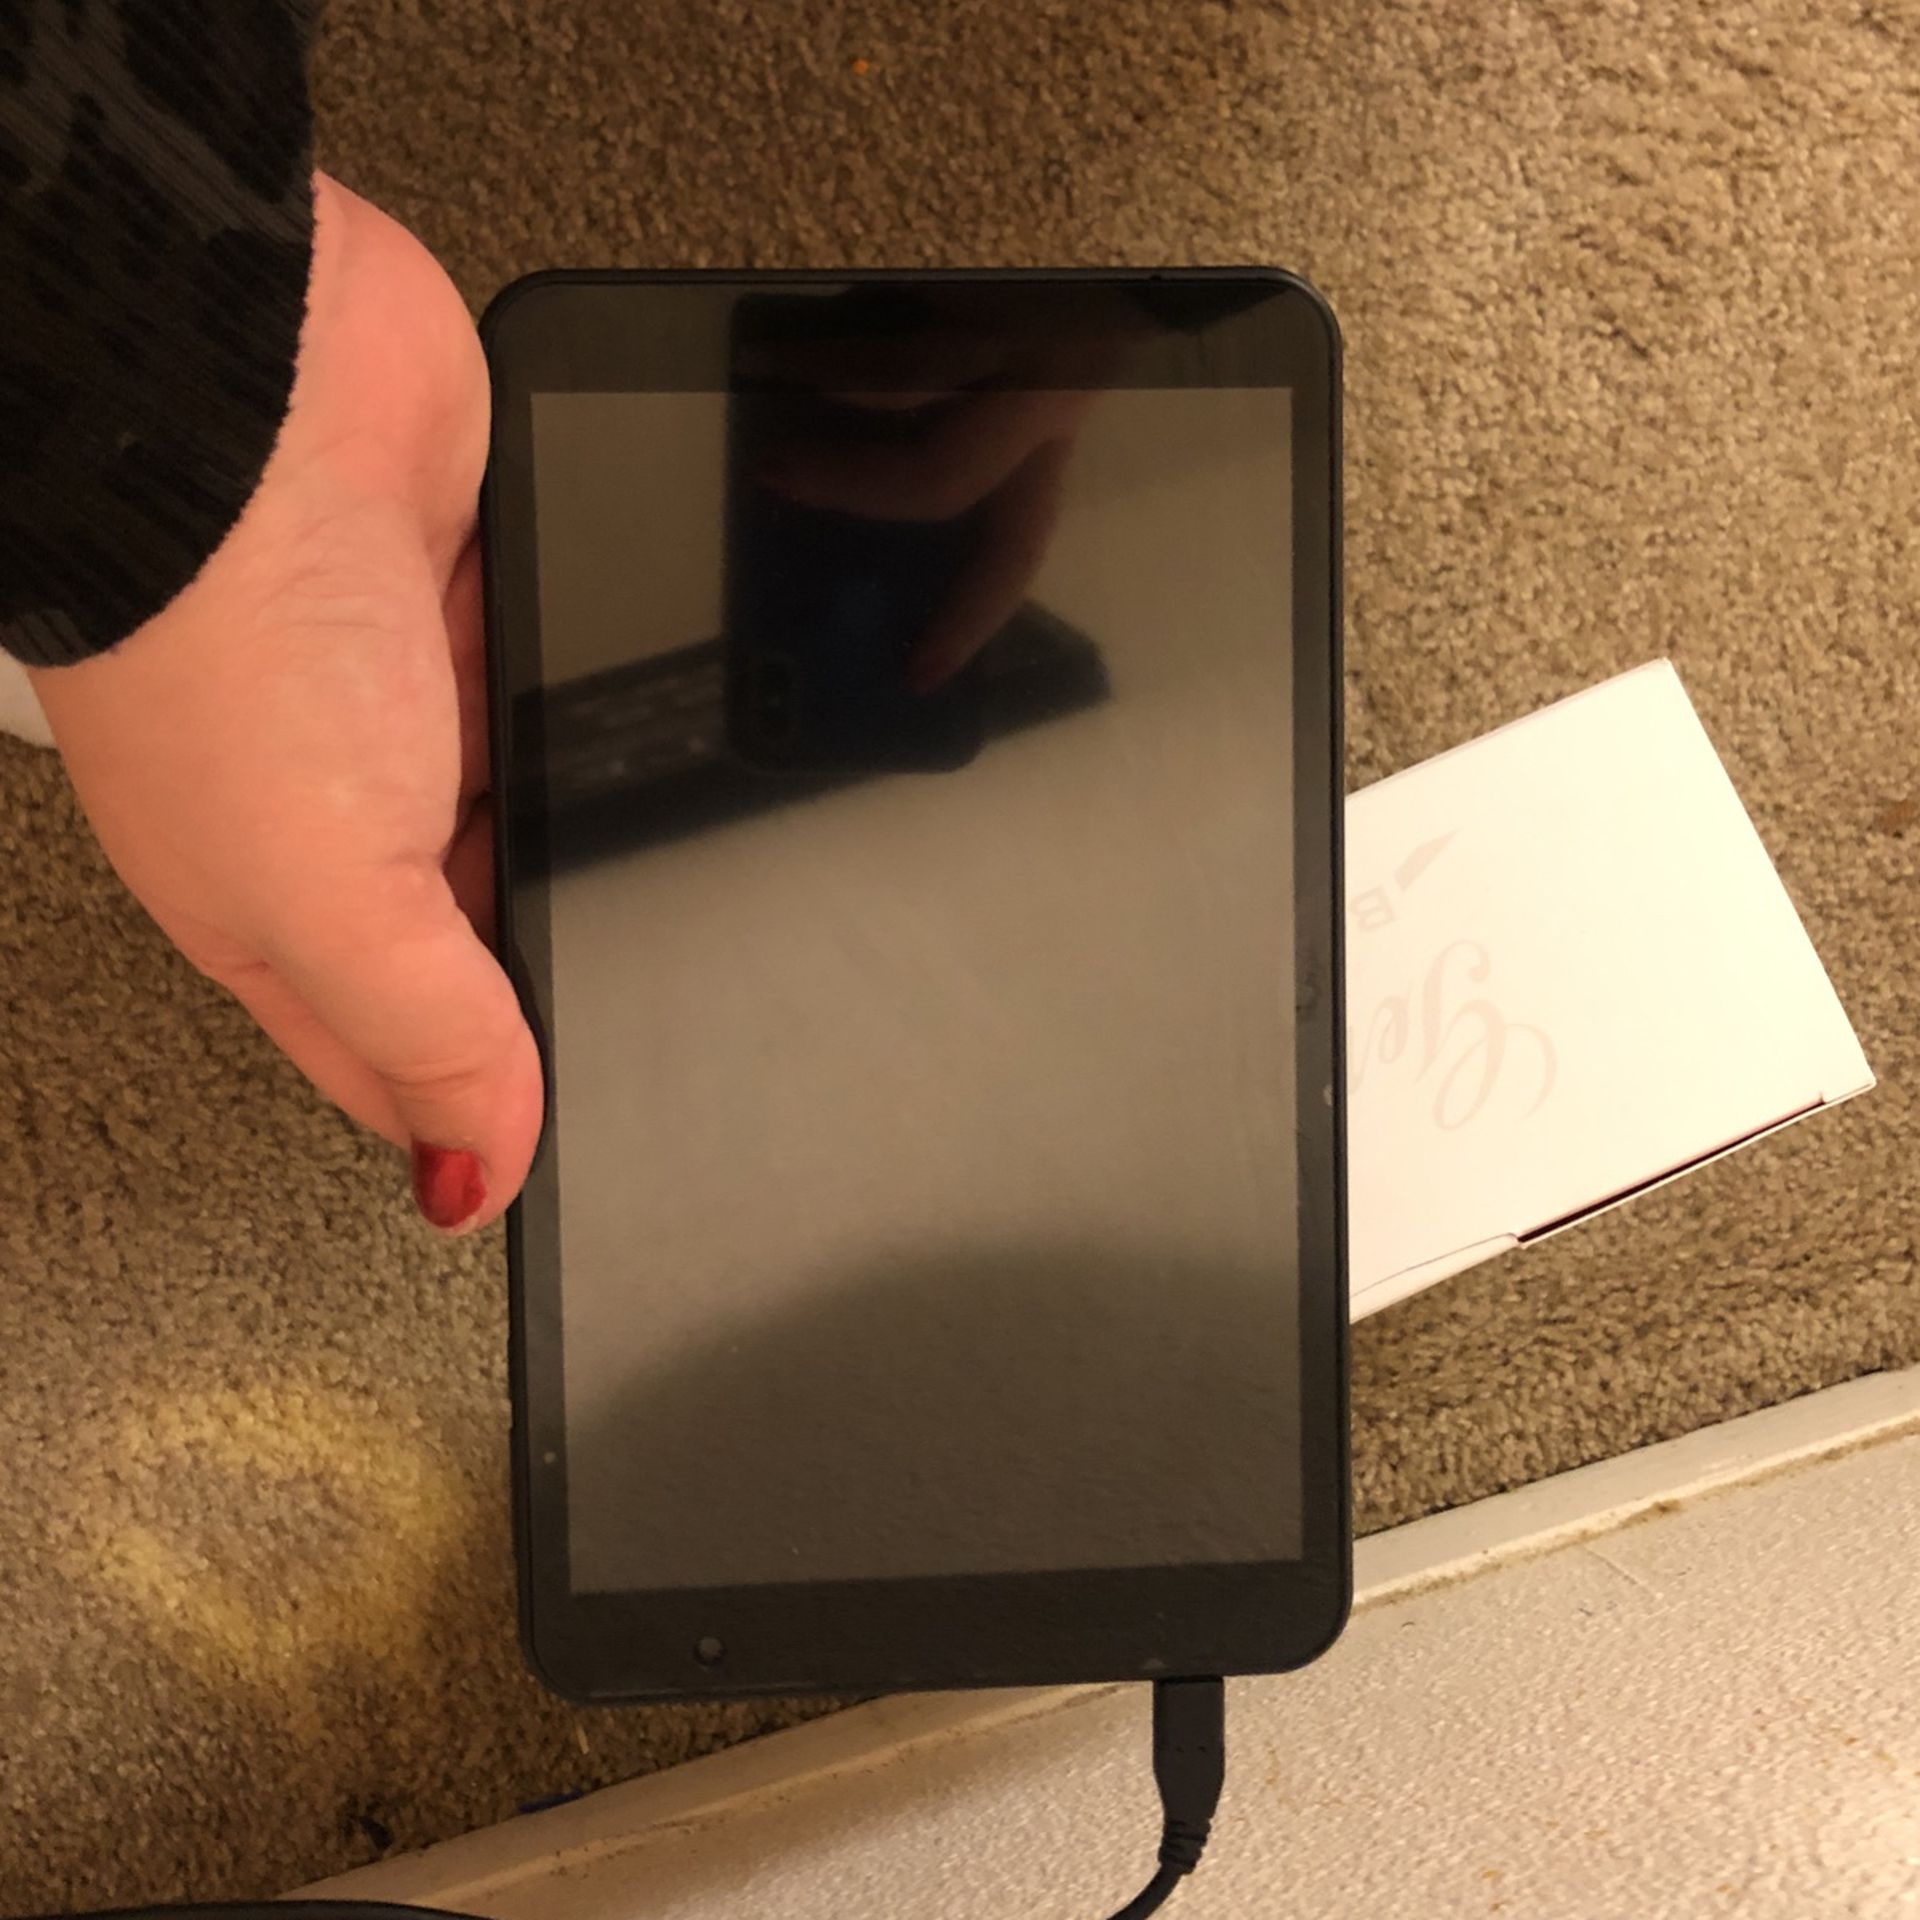 Scepter 8 Android Tablet - New  $60